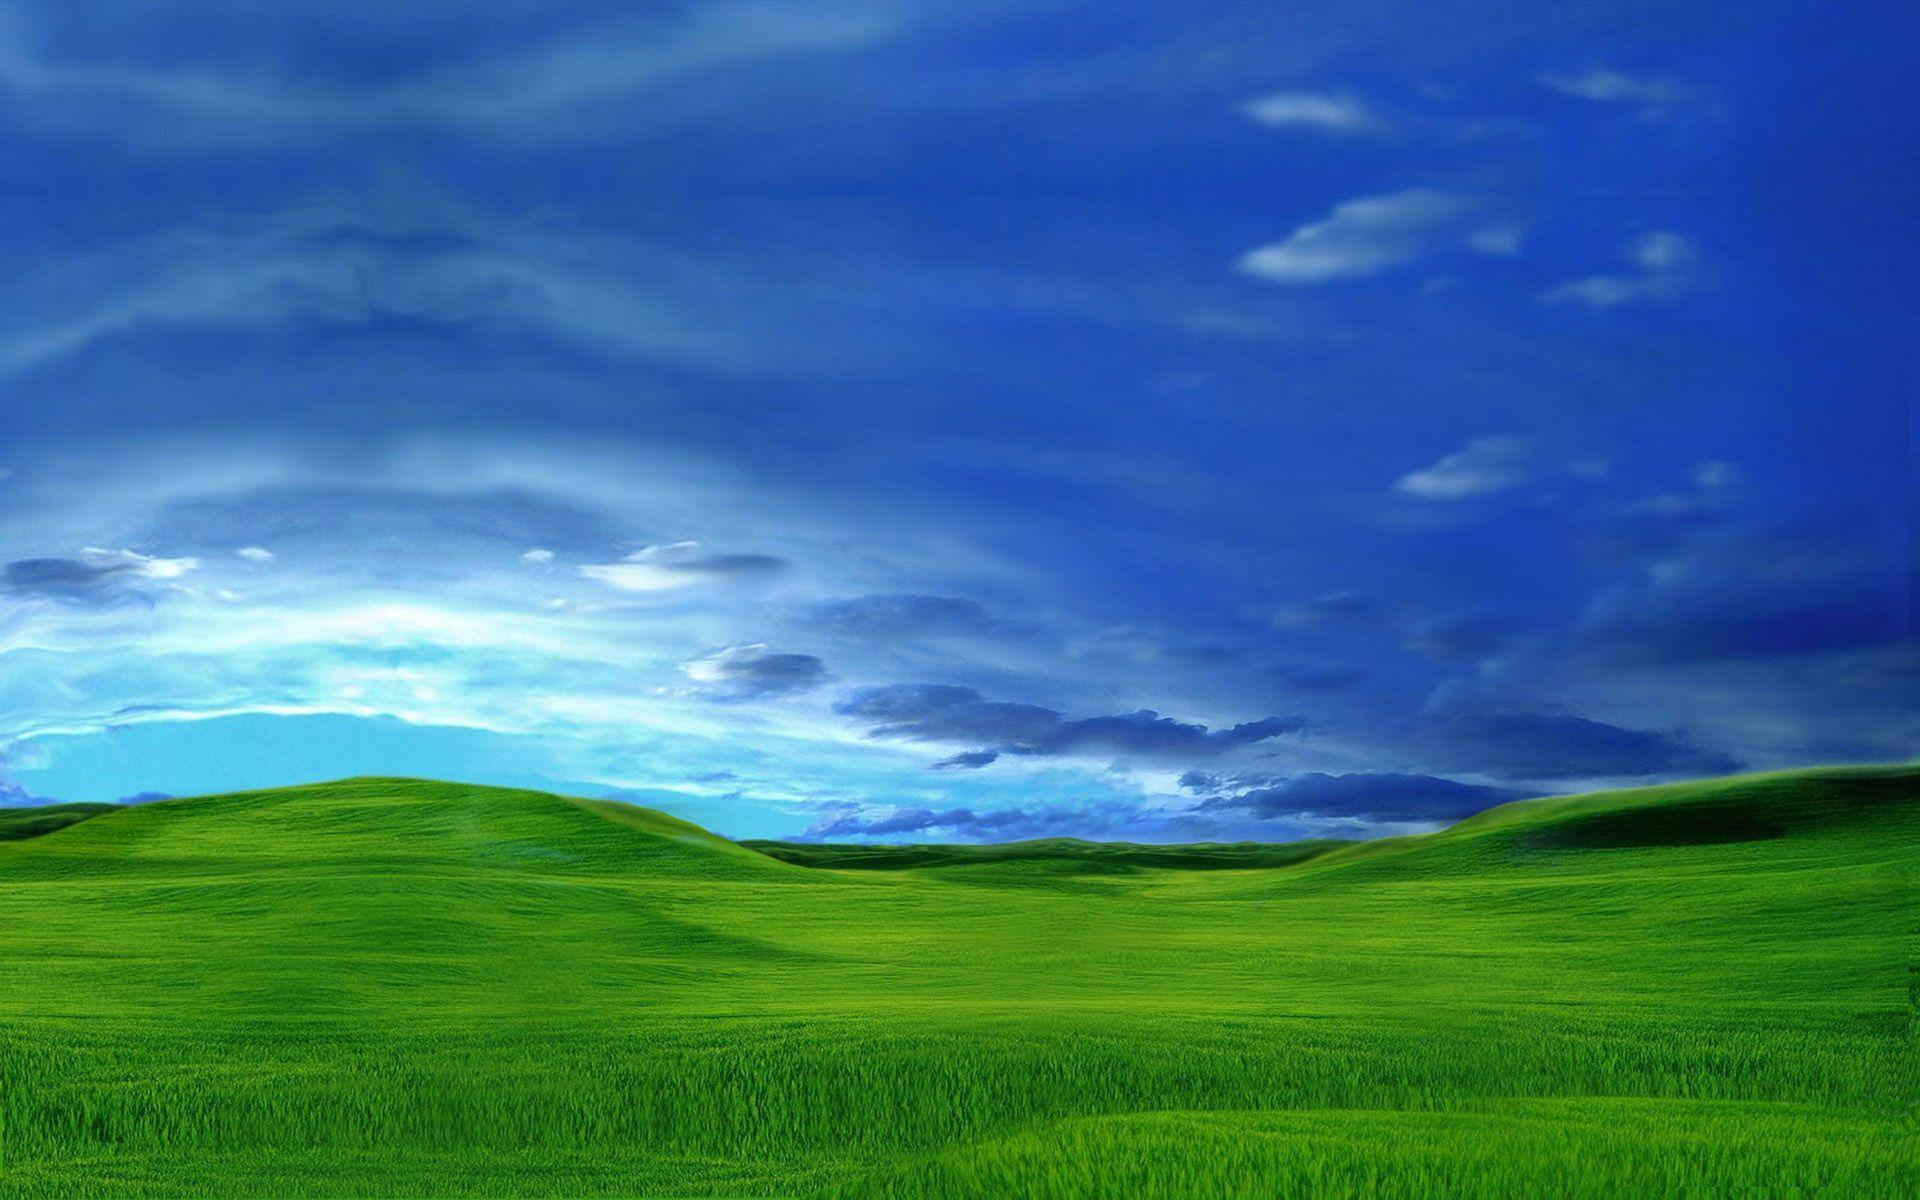 In Windows XP style / 1920 x 1200 / Landscape / Photography